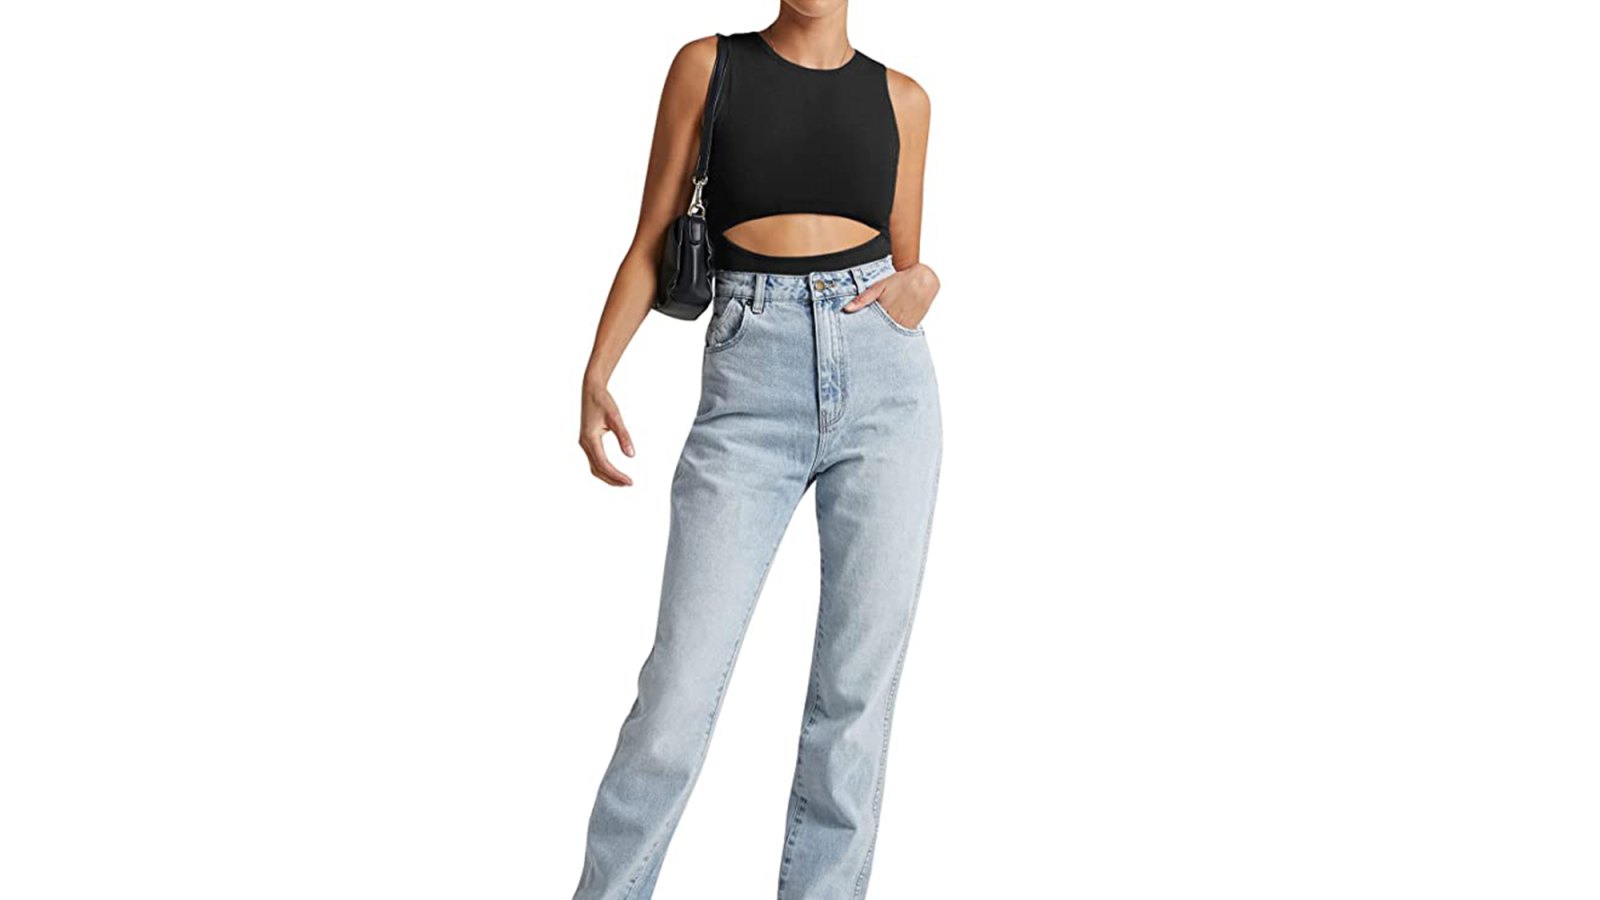 Mymore Cutout Bodysuit Gives You the Crop Look With Tummy Control